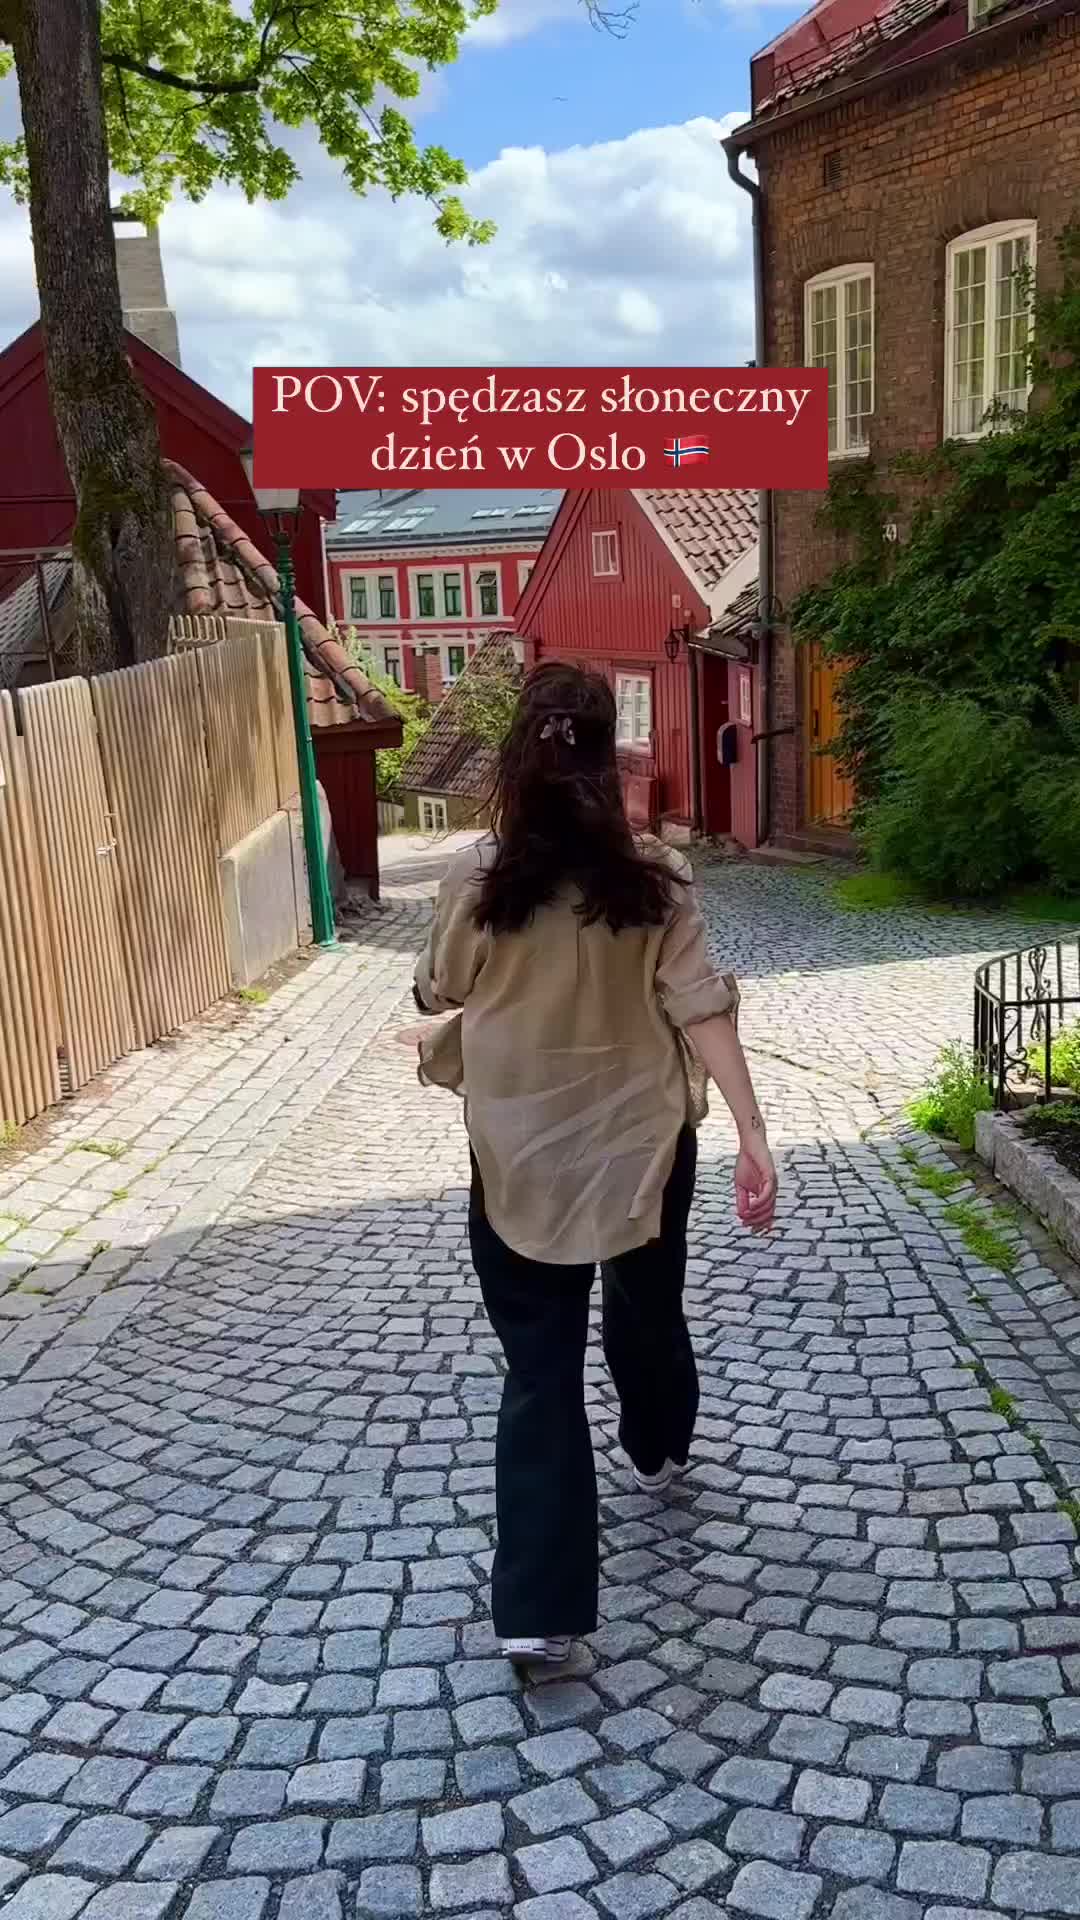 Discover Free Attractions in Oslo, Norway